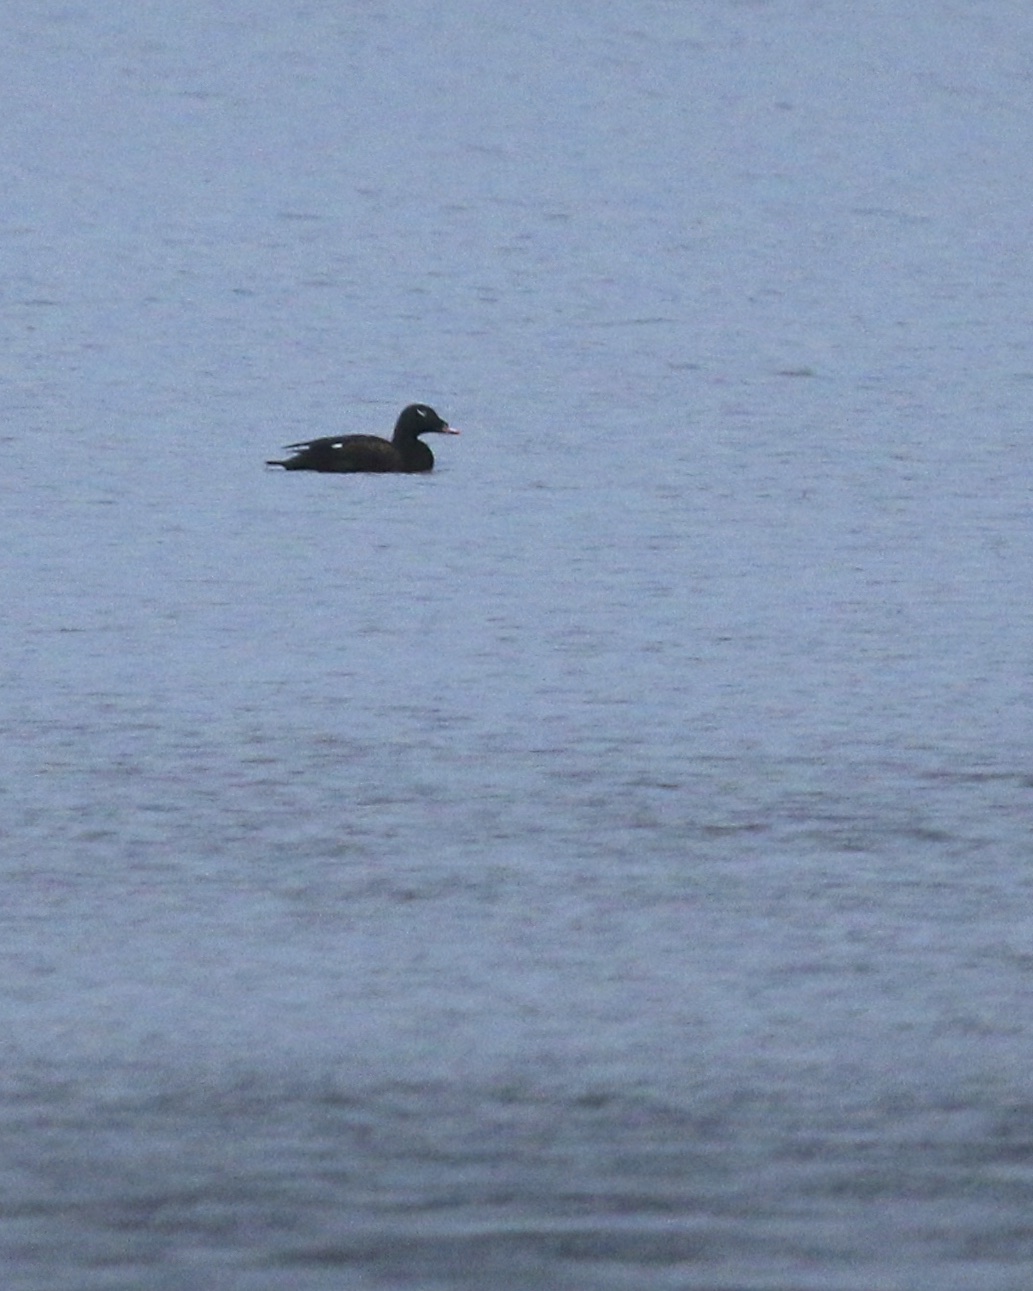 ~I was very excited this afternoon to see this White-winged Scoter in the distance at Indian Kill Reservoir, 12/1/15.~